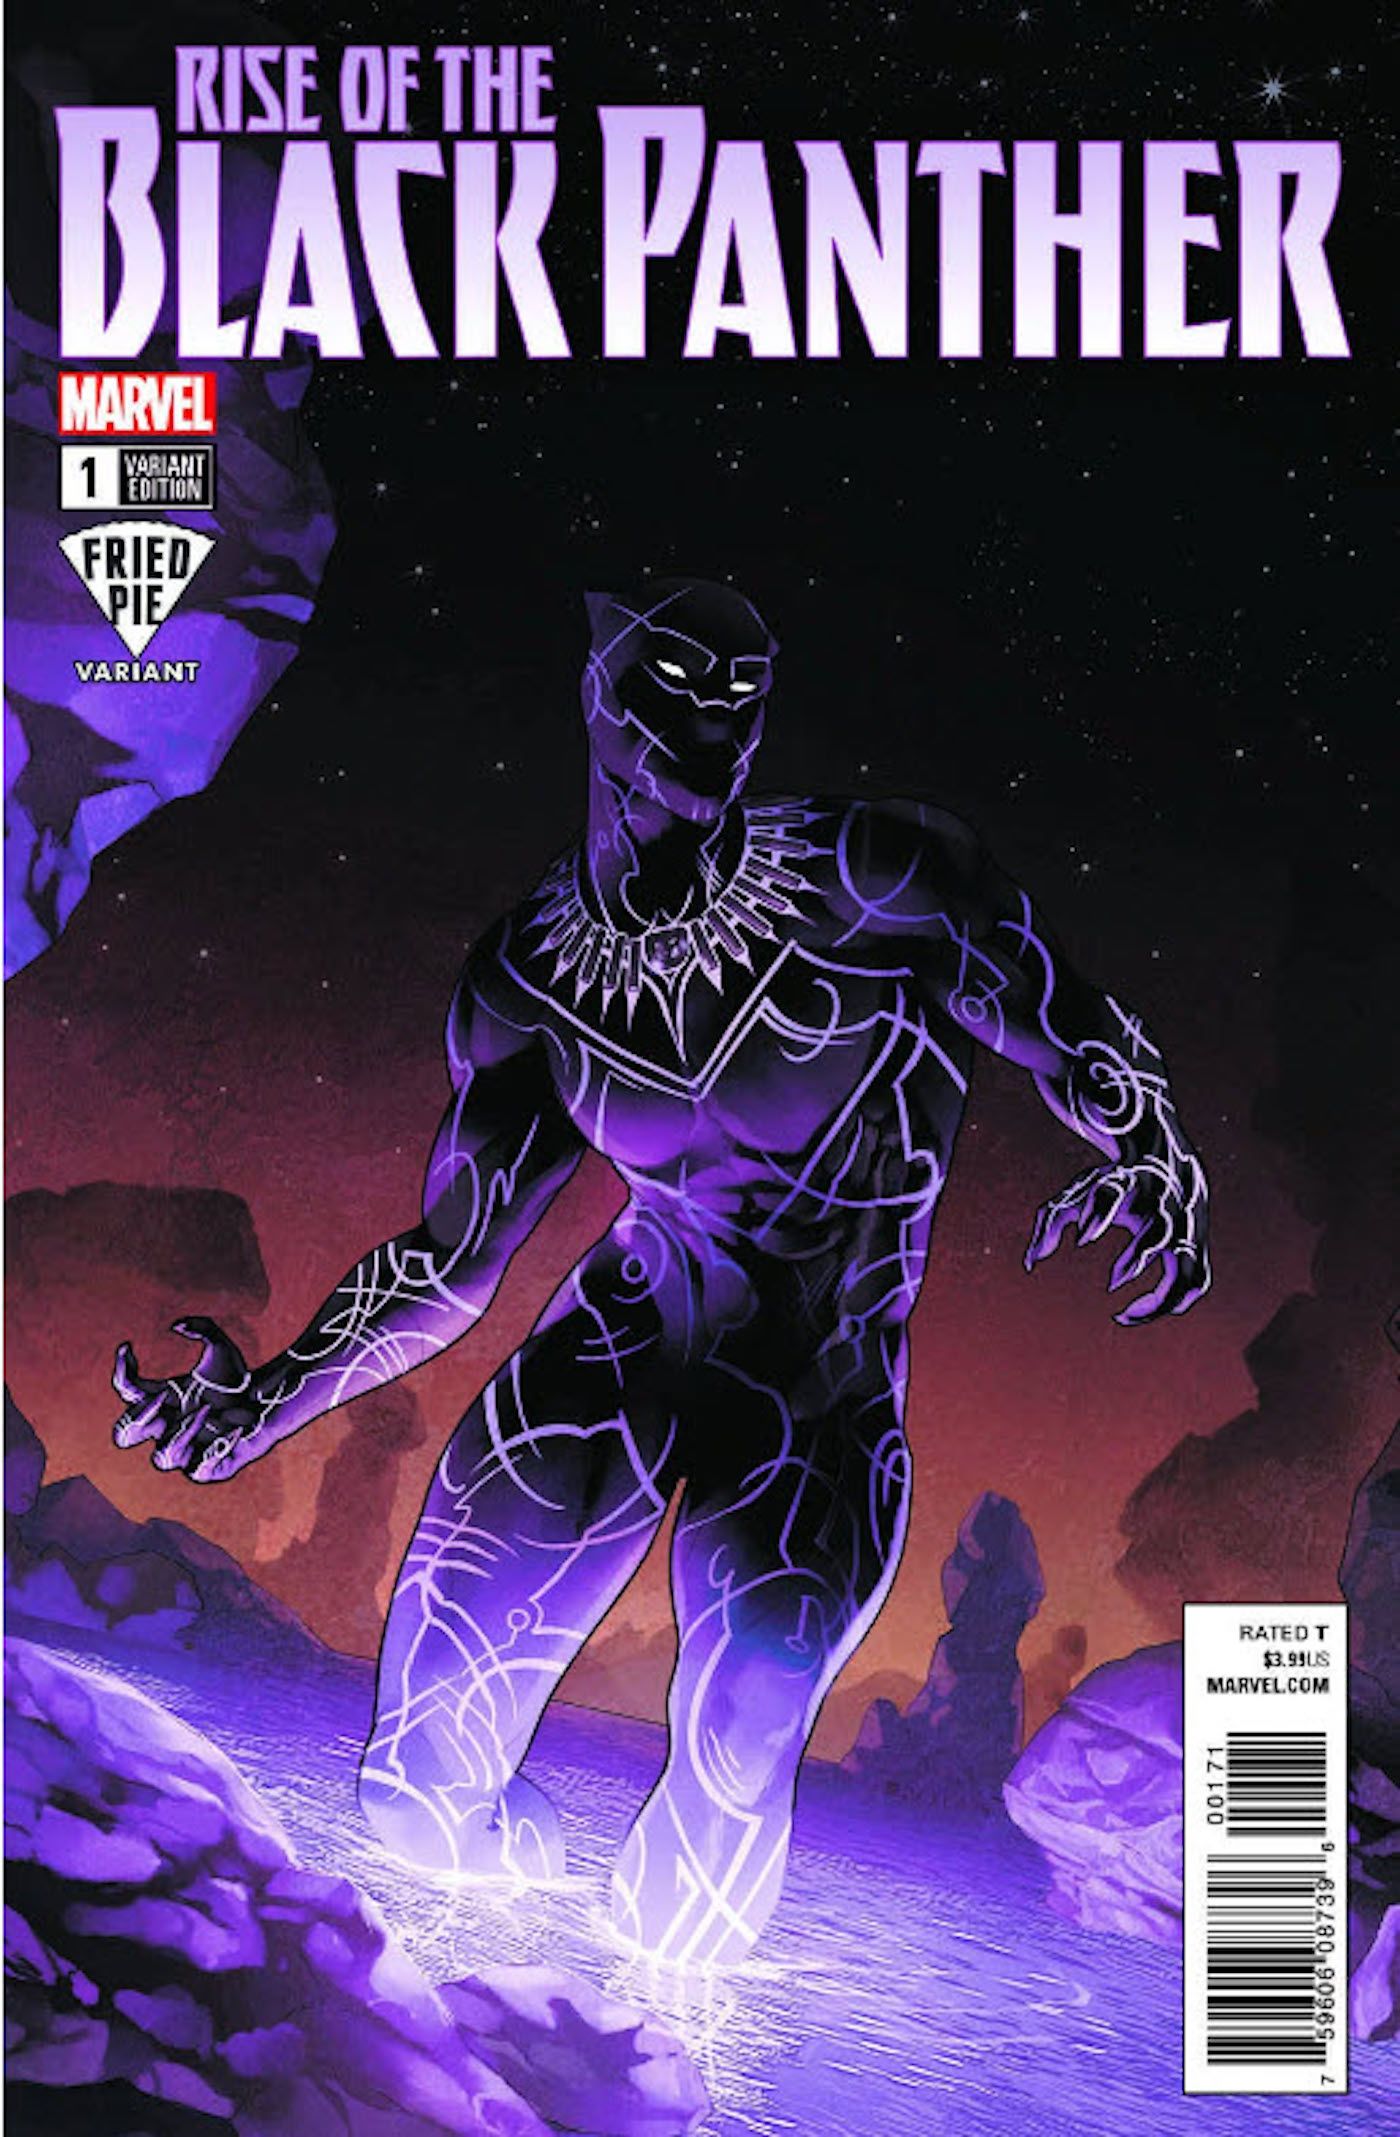 13. Rise of the Black Panther no 1 variant